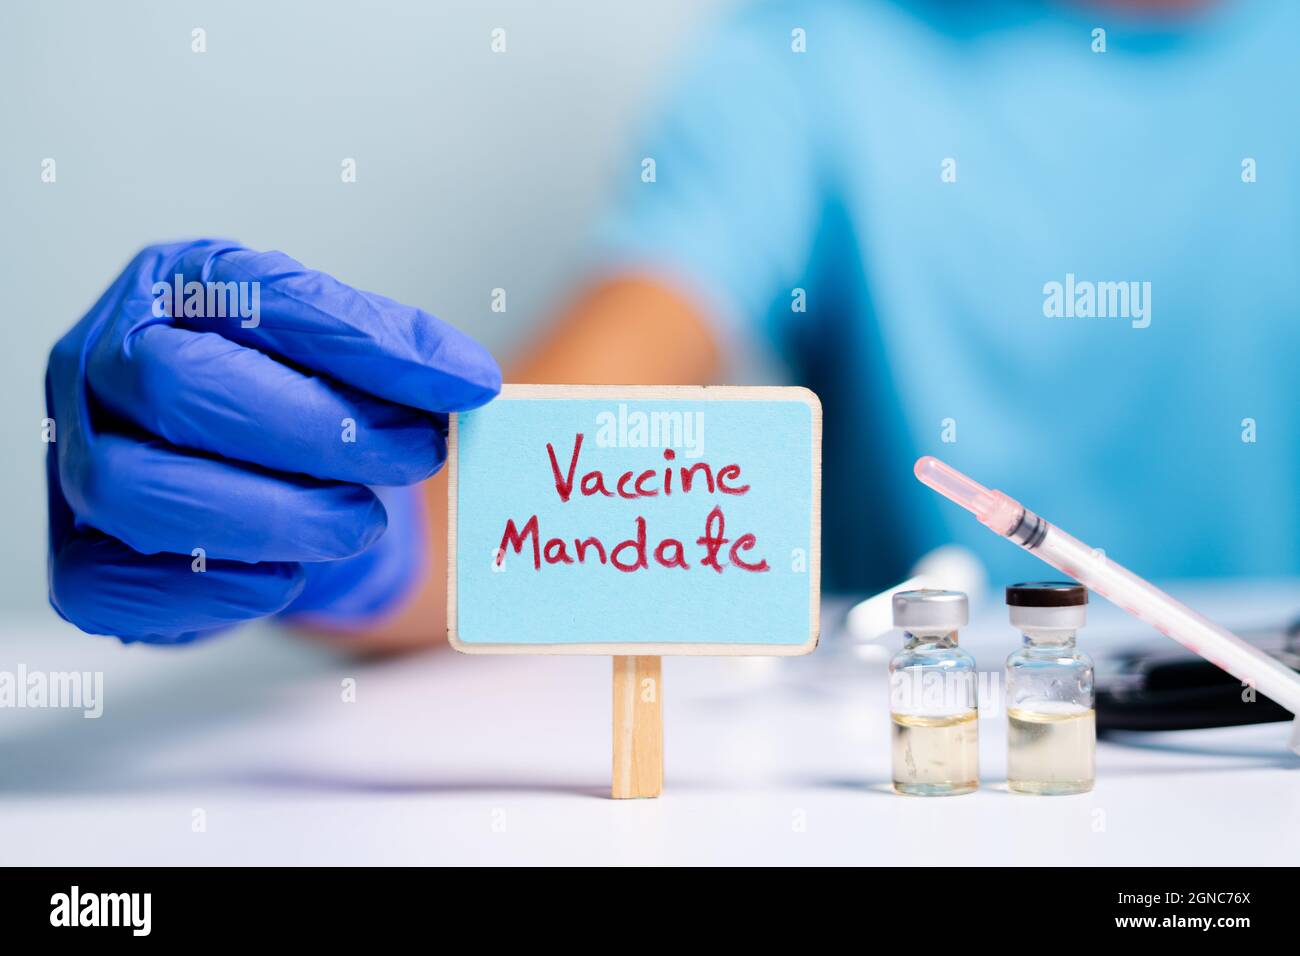 Concept of coronavirus or covid-19 vaccine mandate, showing with doctor hands with gloves by placing sign board next to vaccine shots and syringe Stock Photo